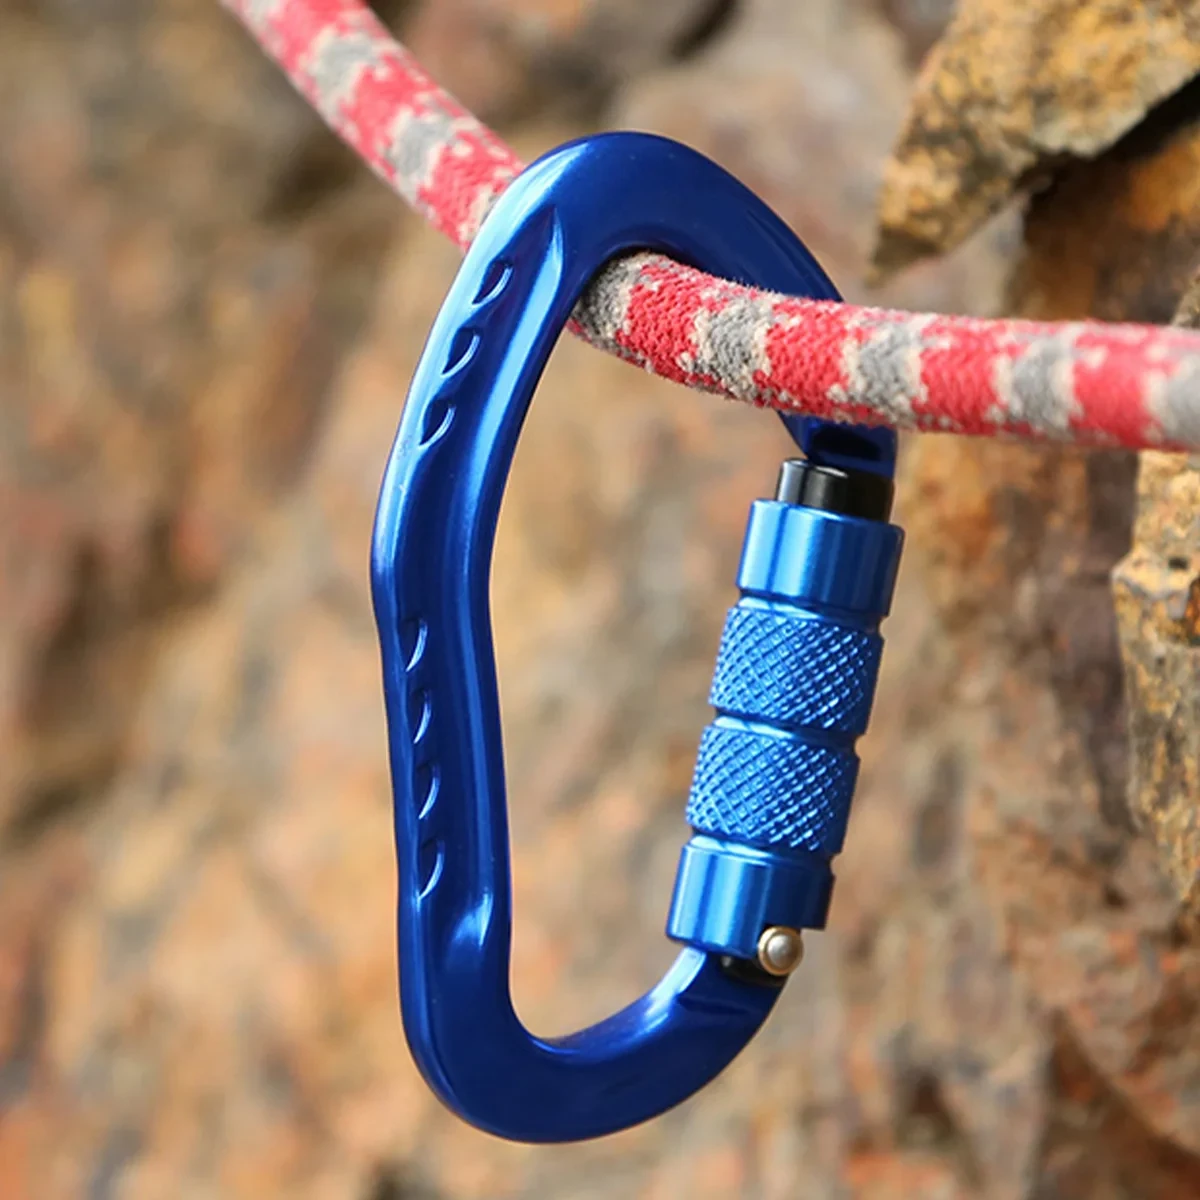 Essential Safety Equipment for Rock Climbing: Don't Forget Your Rock Climbing Carabiner!